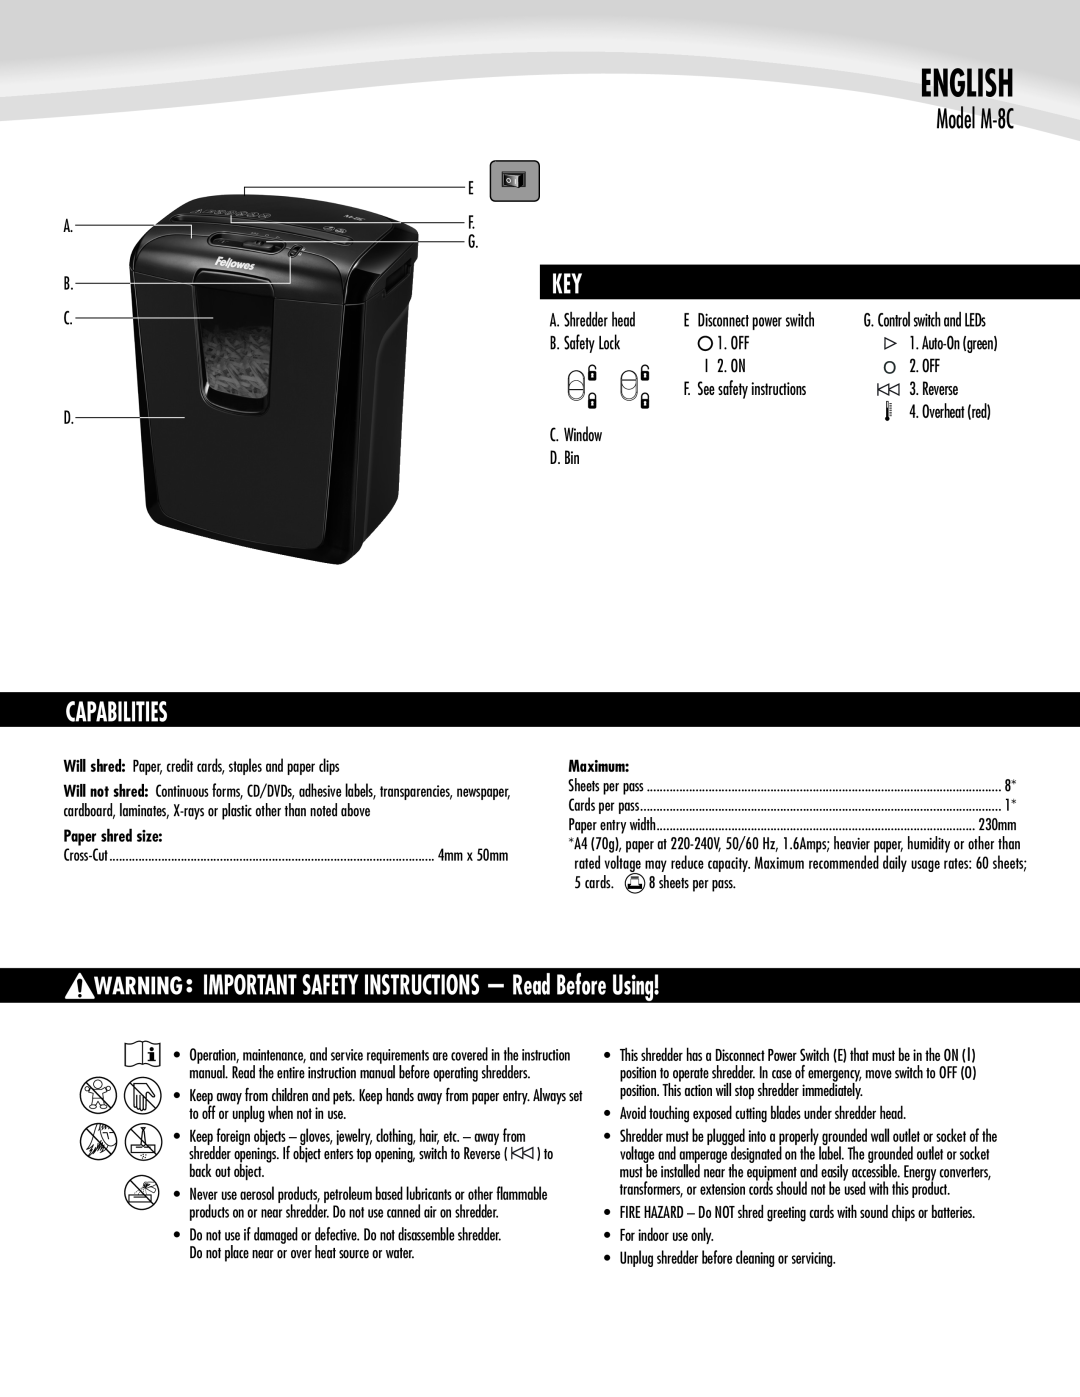 Fellowes Capabilities, IMPORTANT SAFETY INSTRUCTIONS - Read Before Using, English, Model M-8C, E F G, B. Safety Lock 